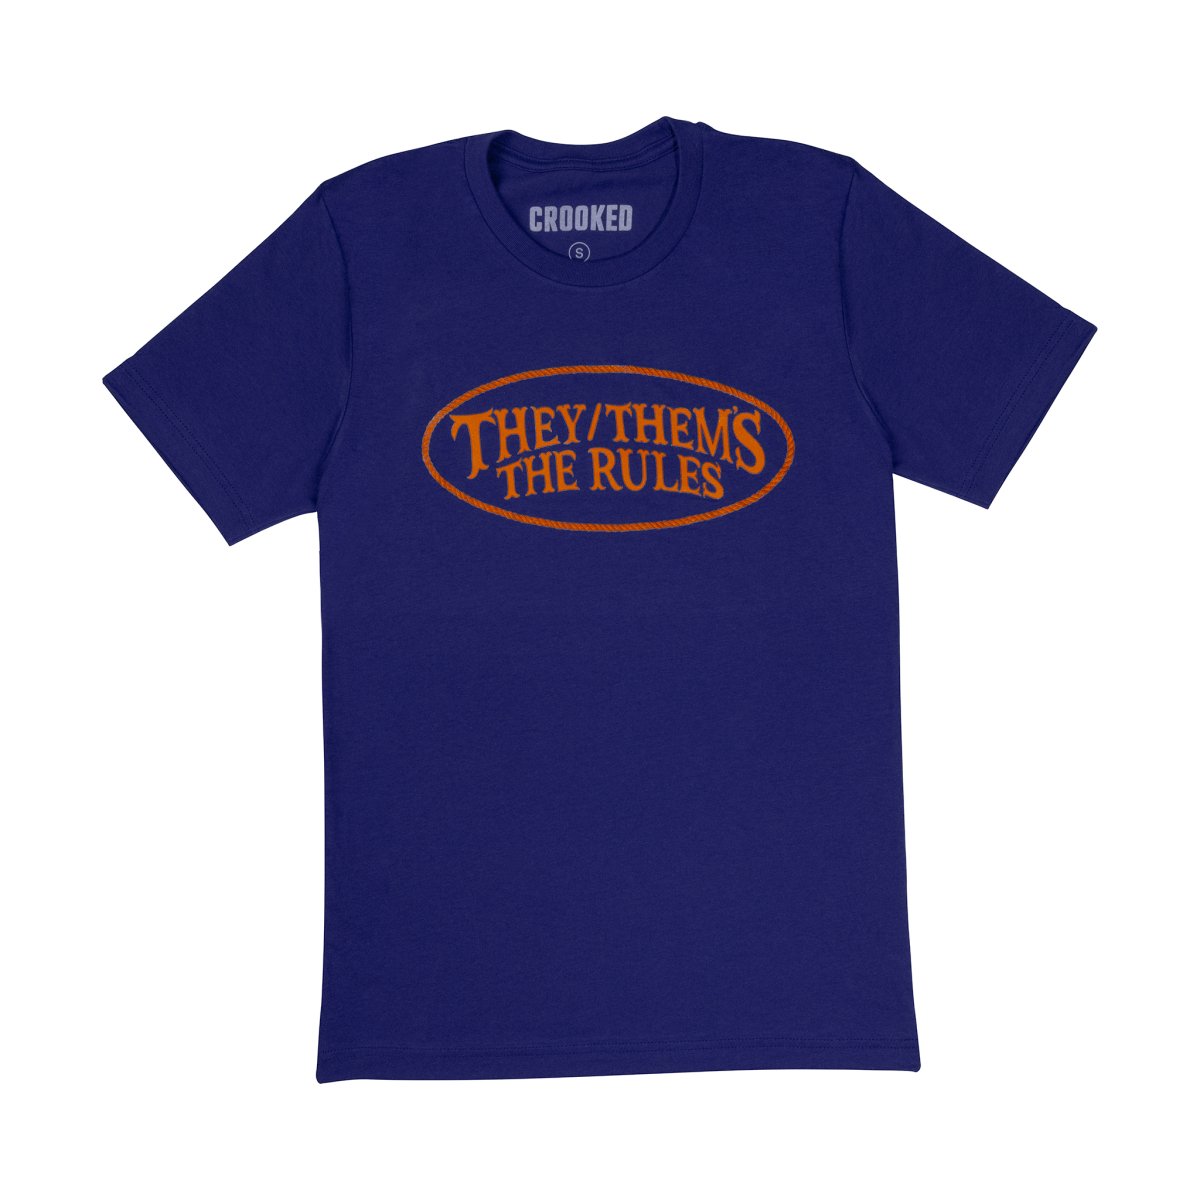 They/Thems The Rules T-Shirt